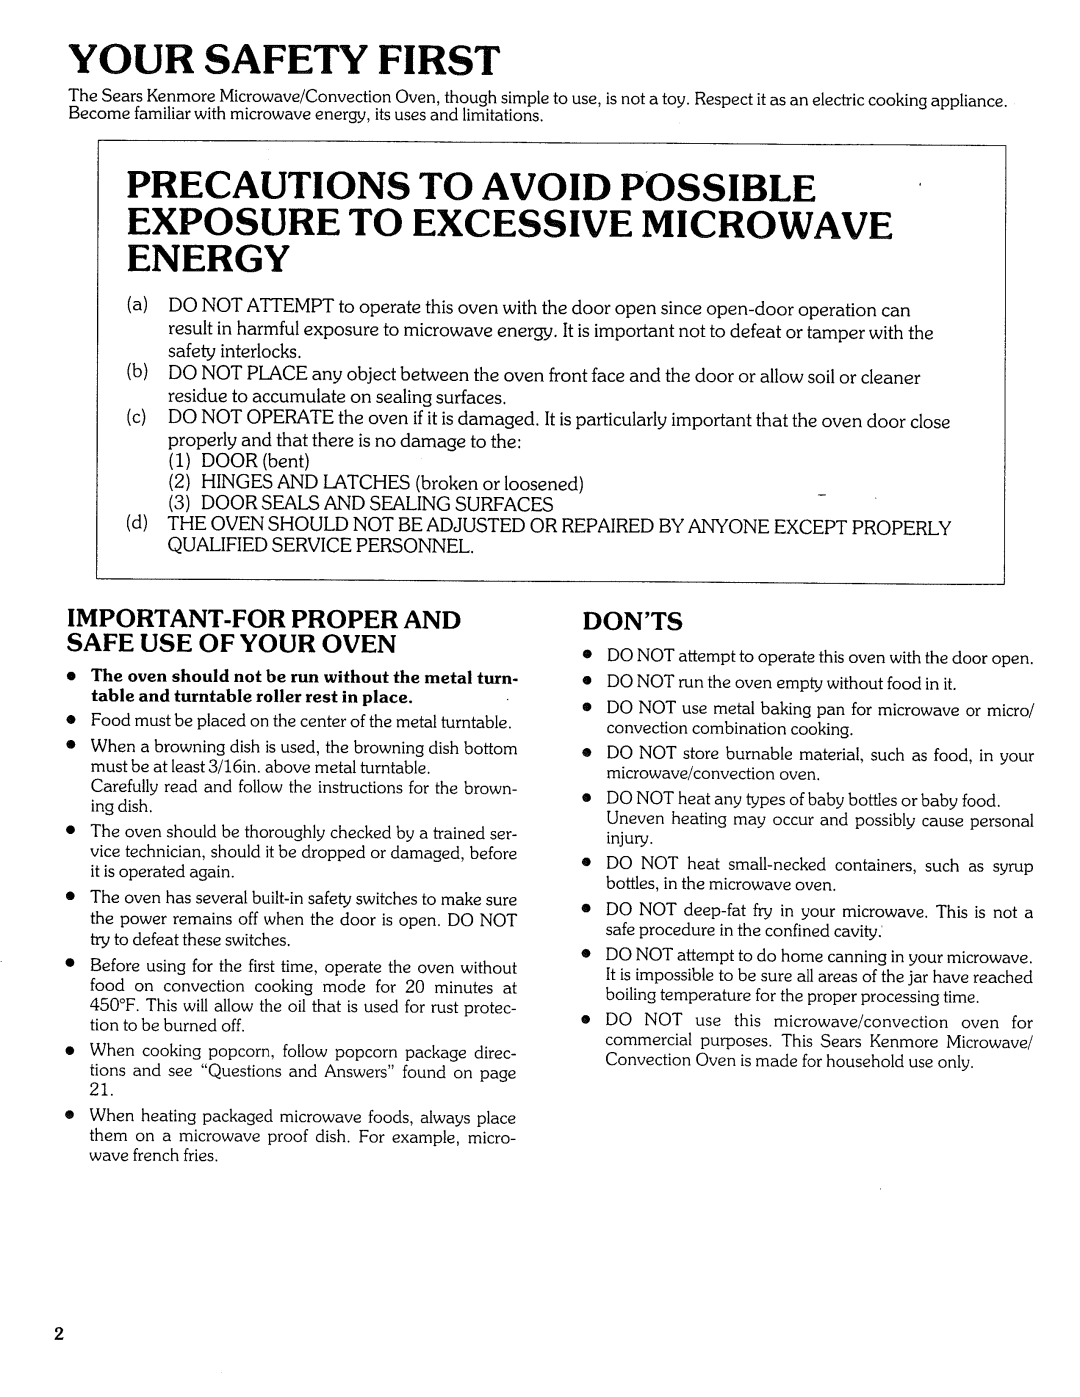 Sears Microwave Oven manual Your Safety First, Important-Forproper And Safe Use Of Your Oven, Donts 